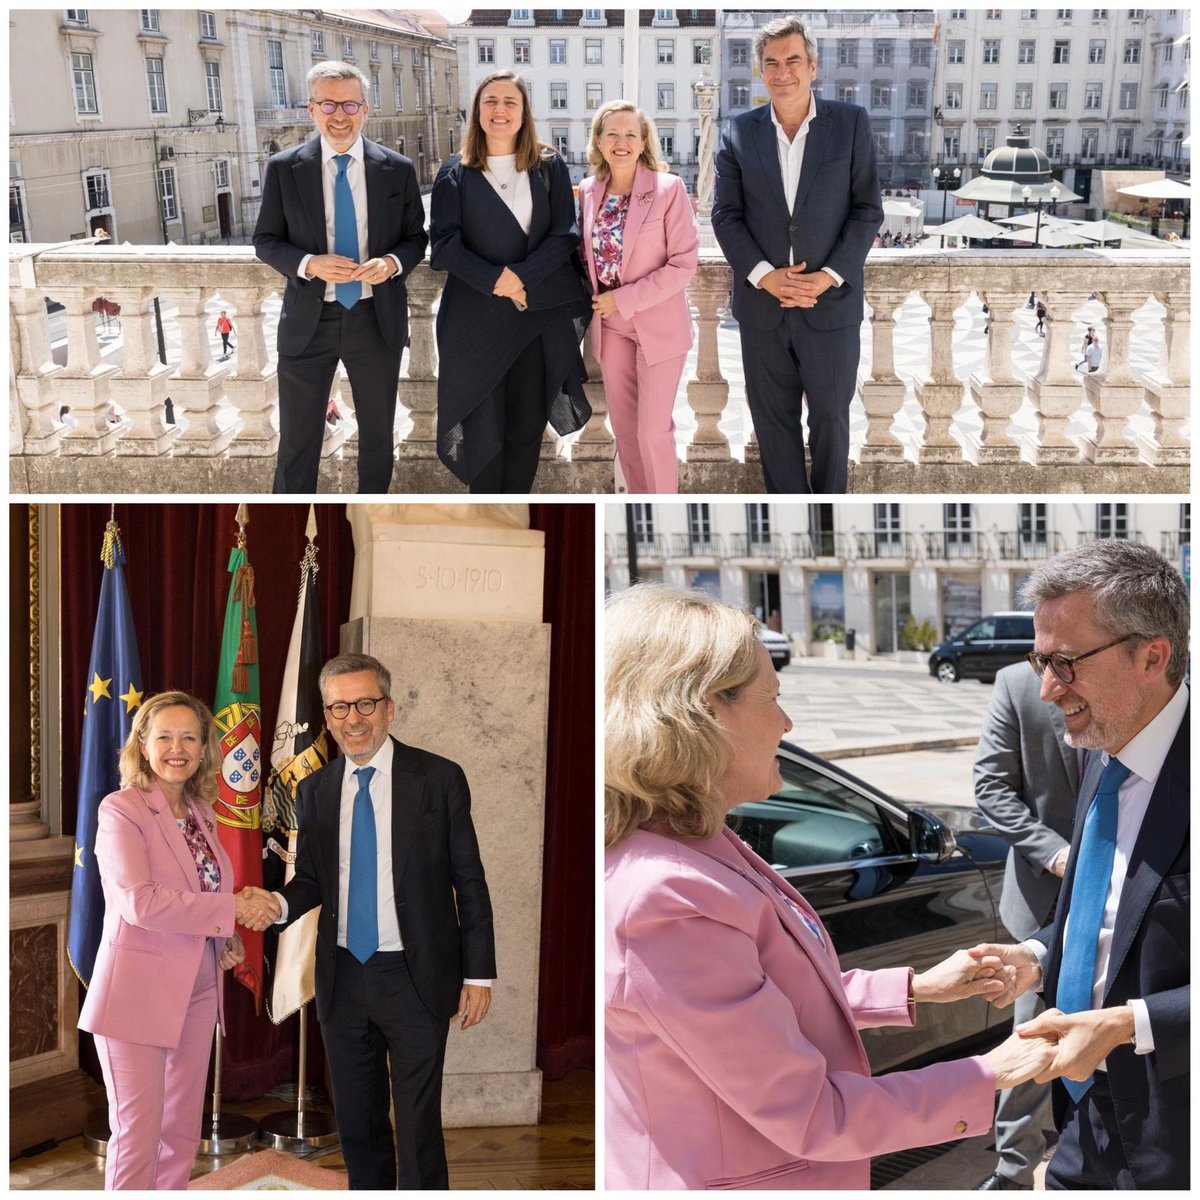 🇪🇺🇵🇹 Delighted to catch up with my dear Carlos @Moedas @CamaraLisboa. We had a very fruitful exchange on ongoing and future @EIB Group investments in #Lisbon, from flood prevention tunnels to urban regeneration, housing, schools and scaling up the flagship unicorn factory.